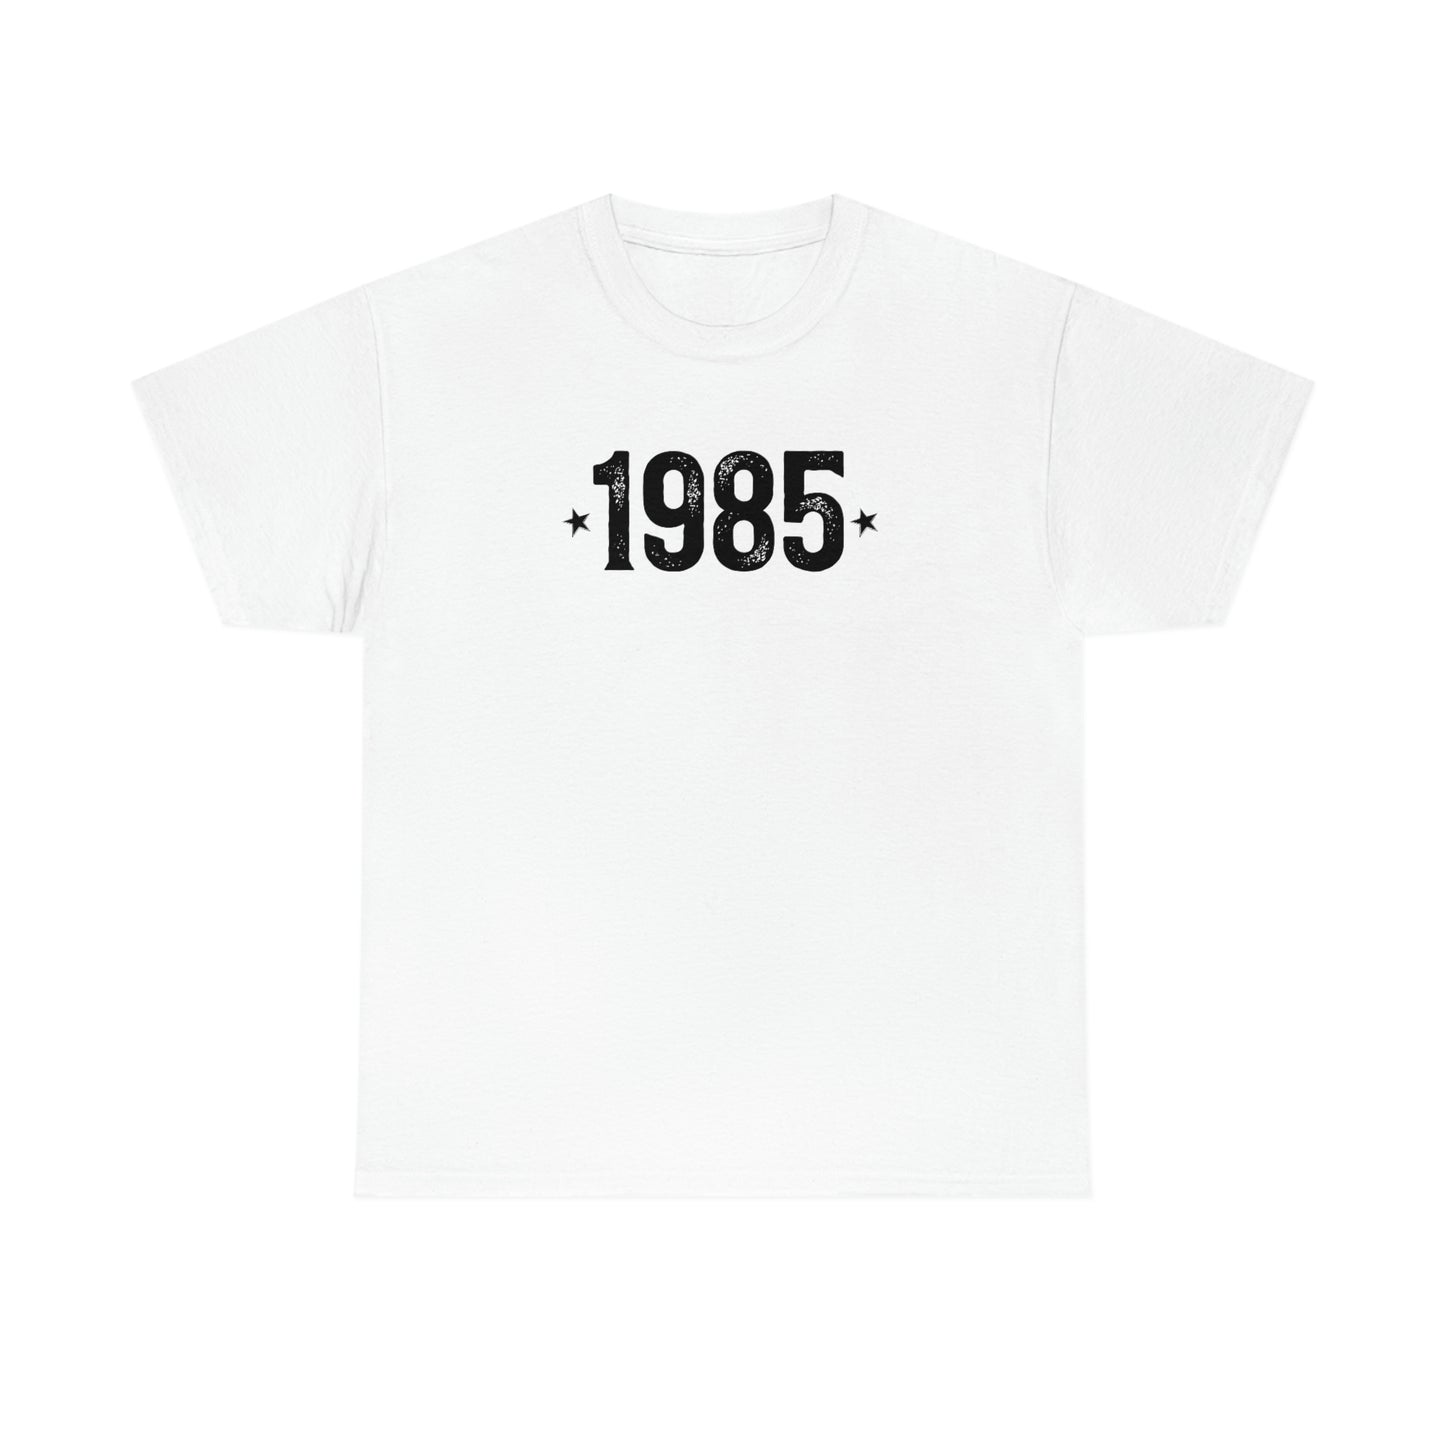 1985 year celebration tee with shoulder tape for improved durability